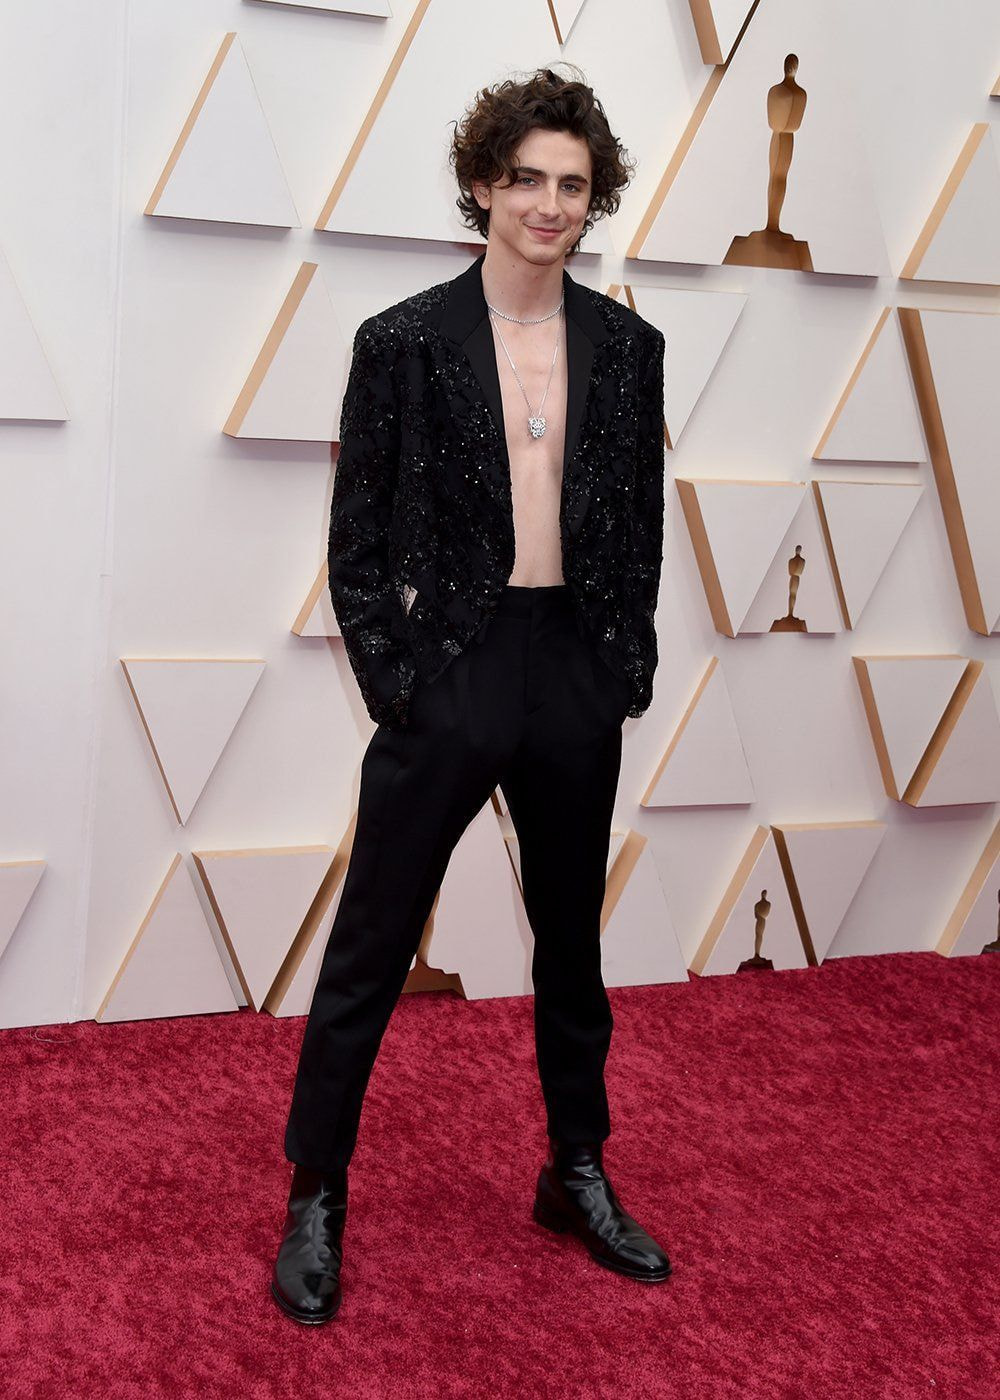 [theqoo] TIMOTHEE CHALAMET WHO WORE A CROP TOP ON THE OSCAR'S RED CARPET